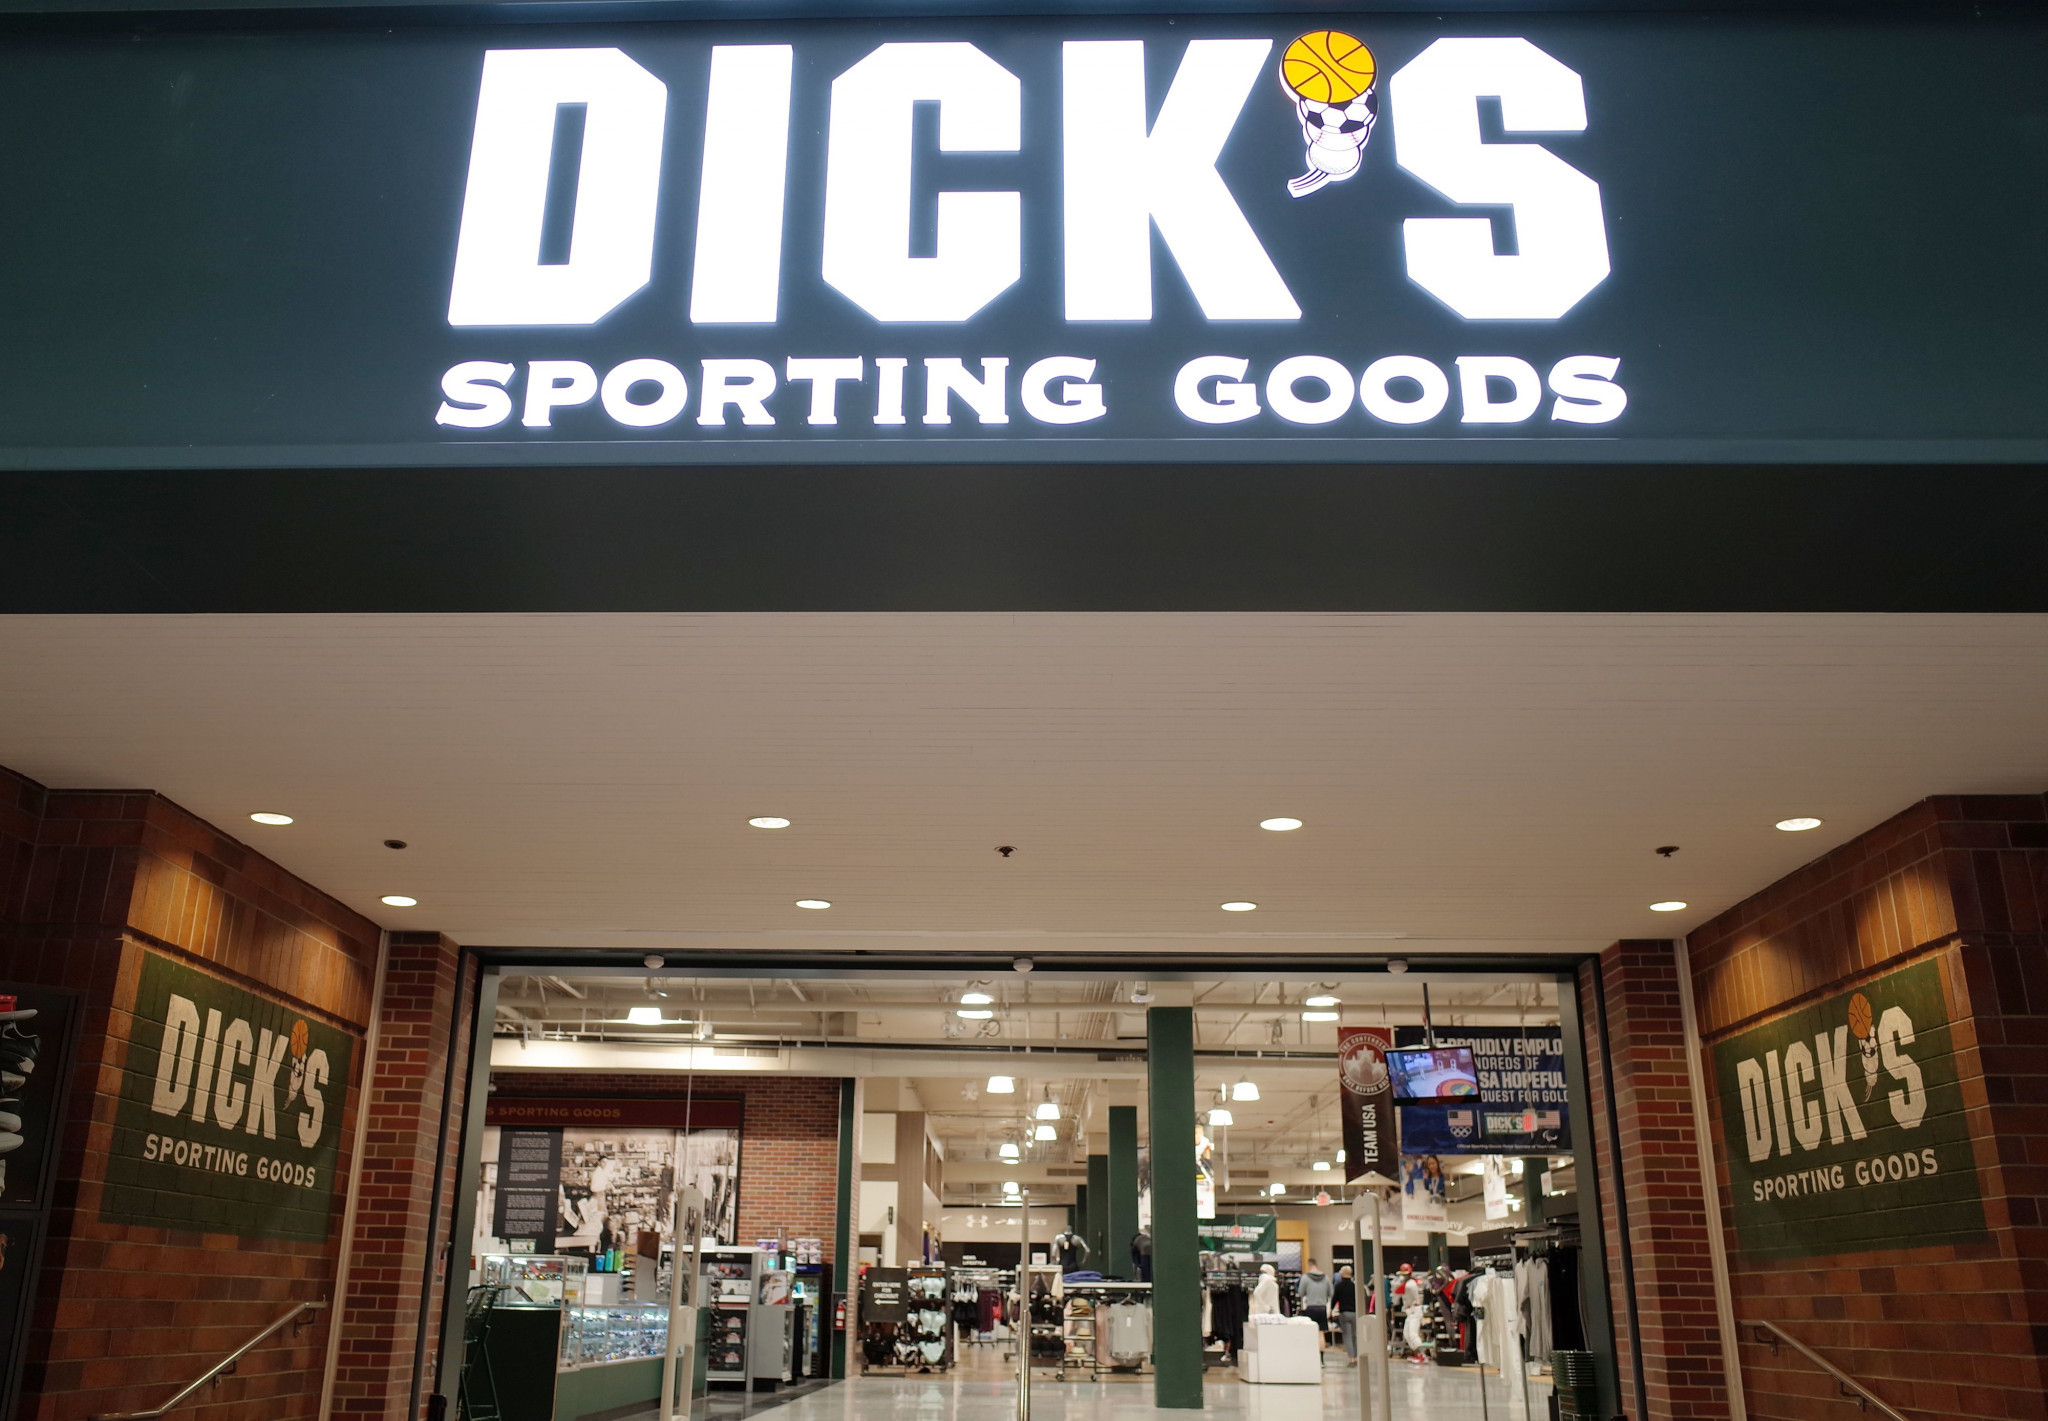 Dick’s Sporting Goods has chosen not to renew its sponsorship of the United States Olympic Committee into 2019 ©Getty Images